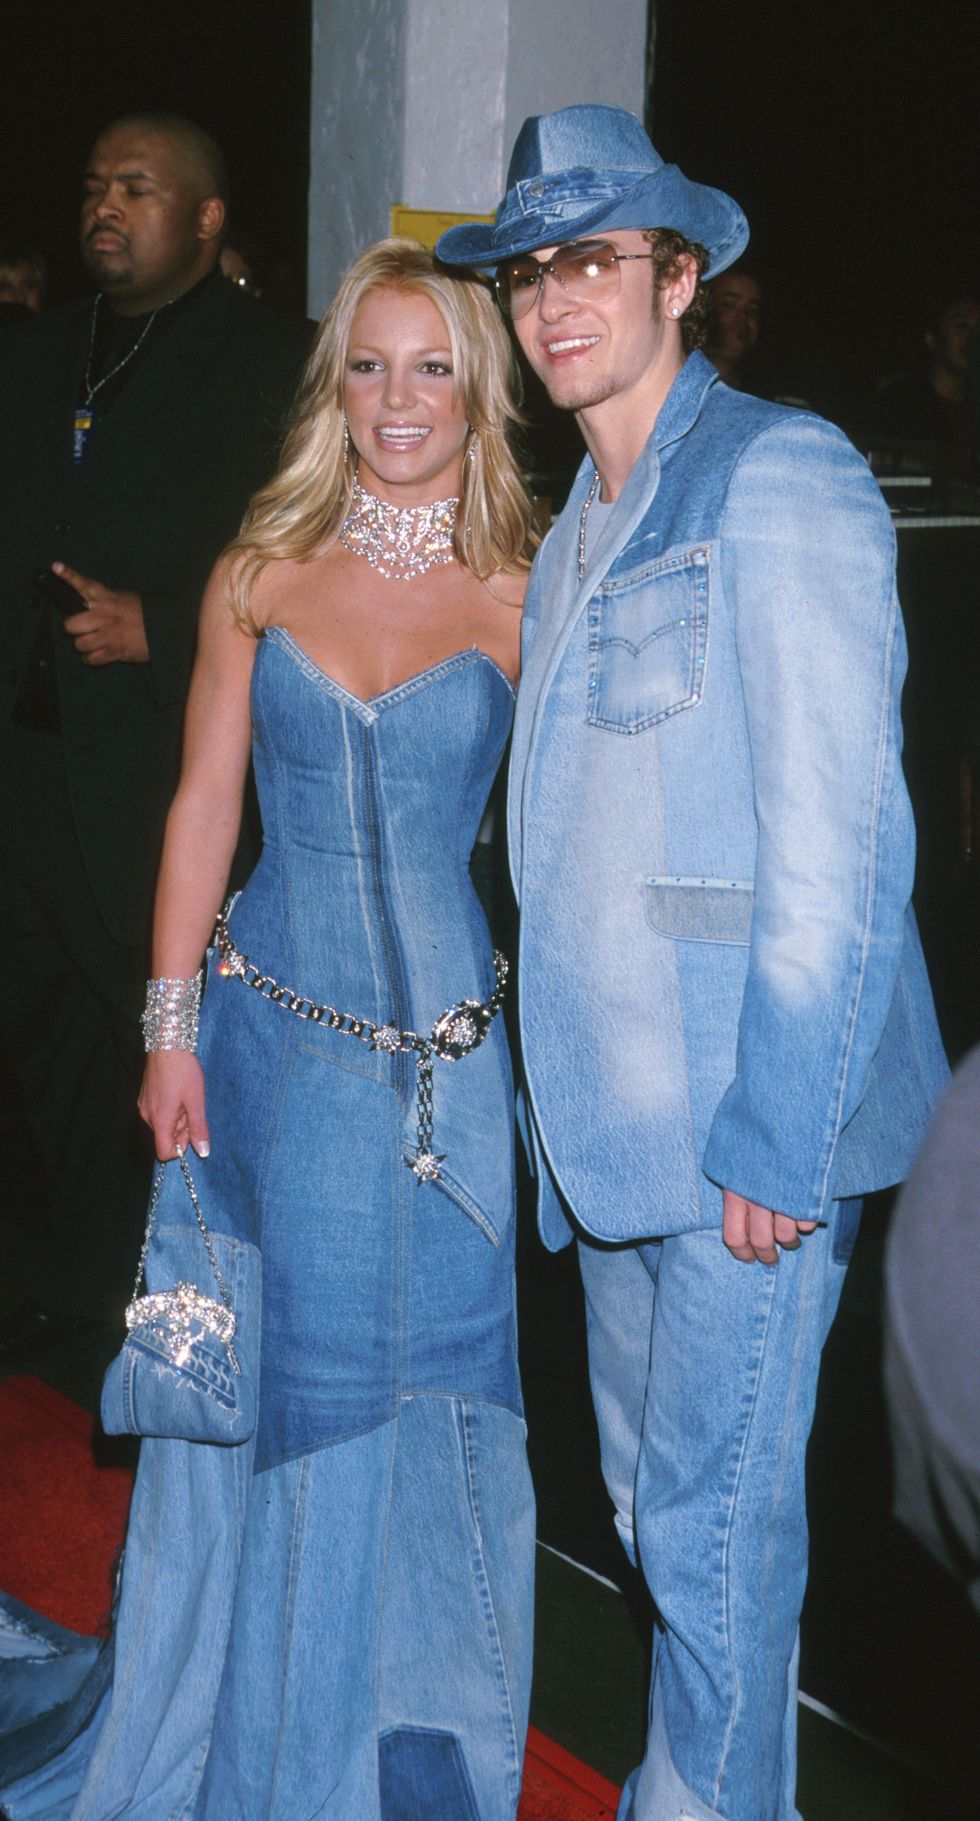 Justin Timberlake and Britney Spears' memorable matching denim outfits